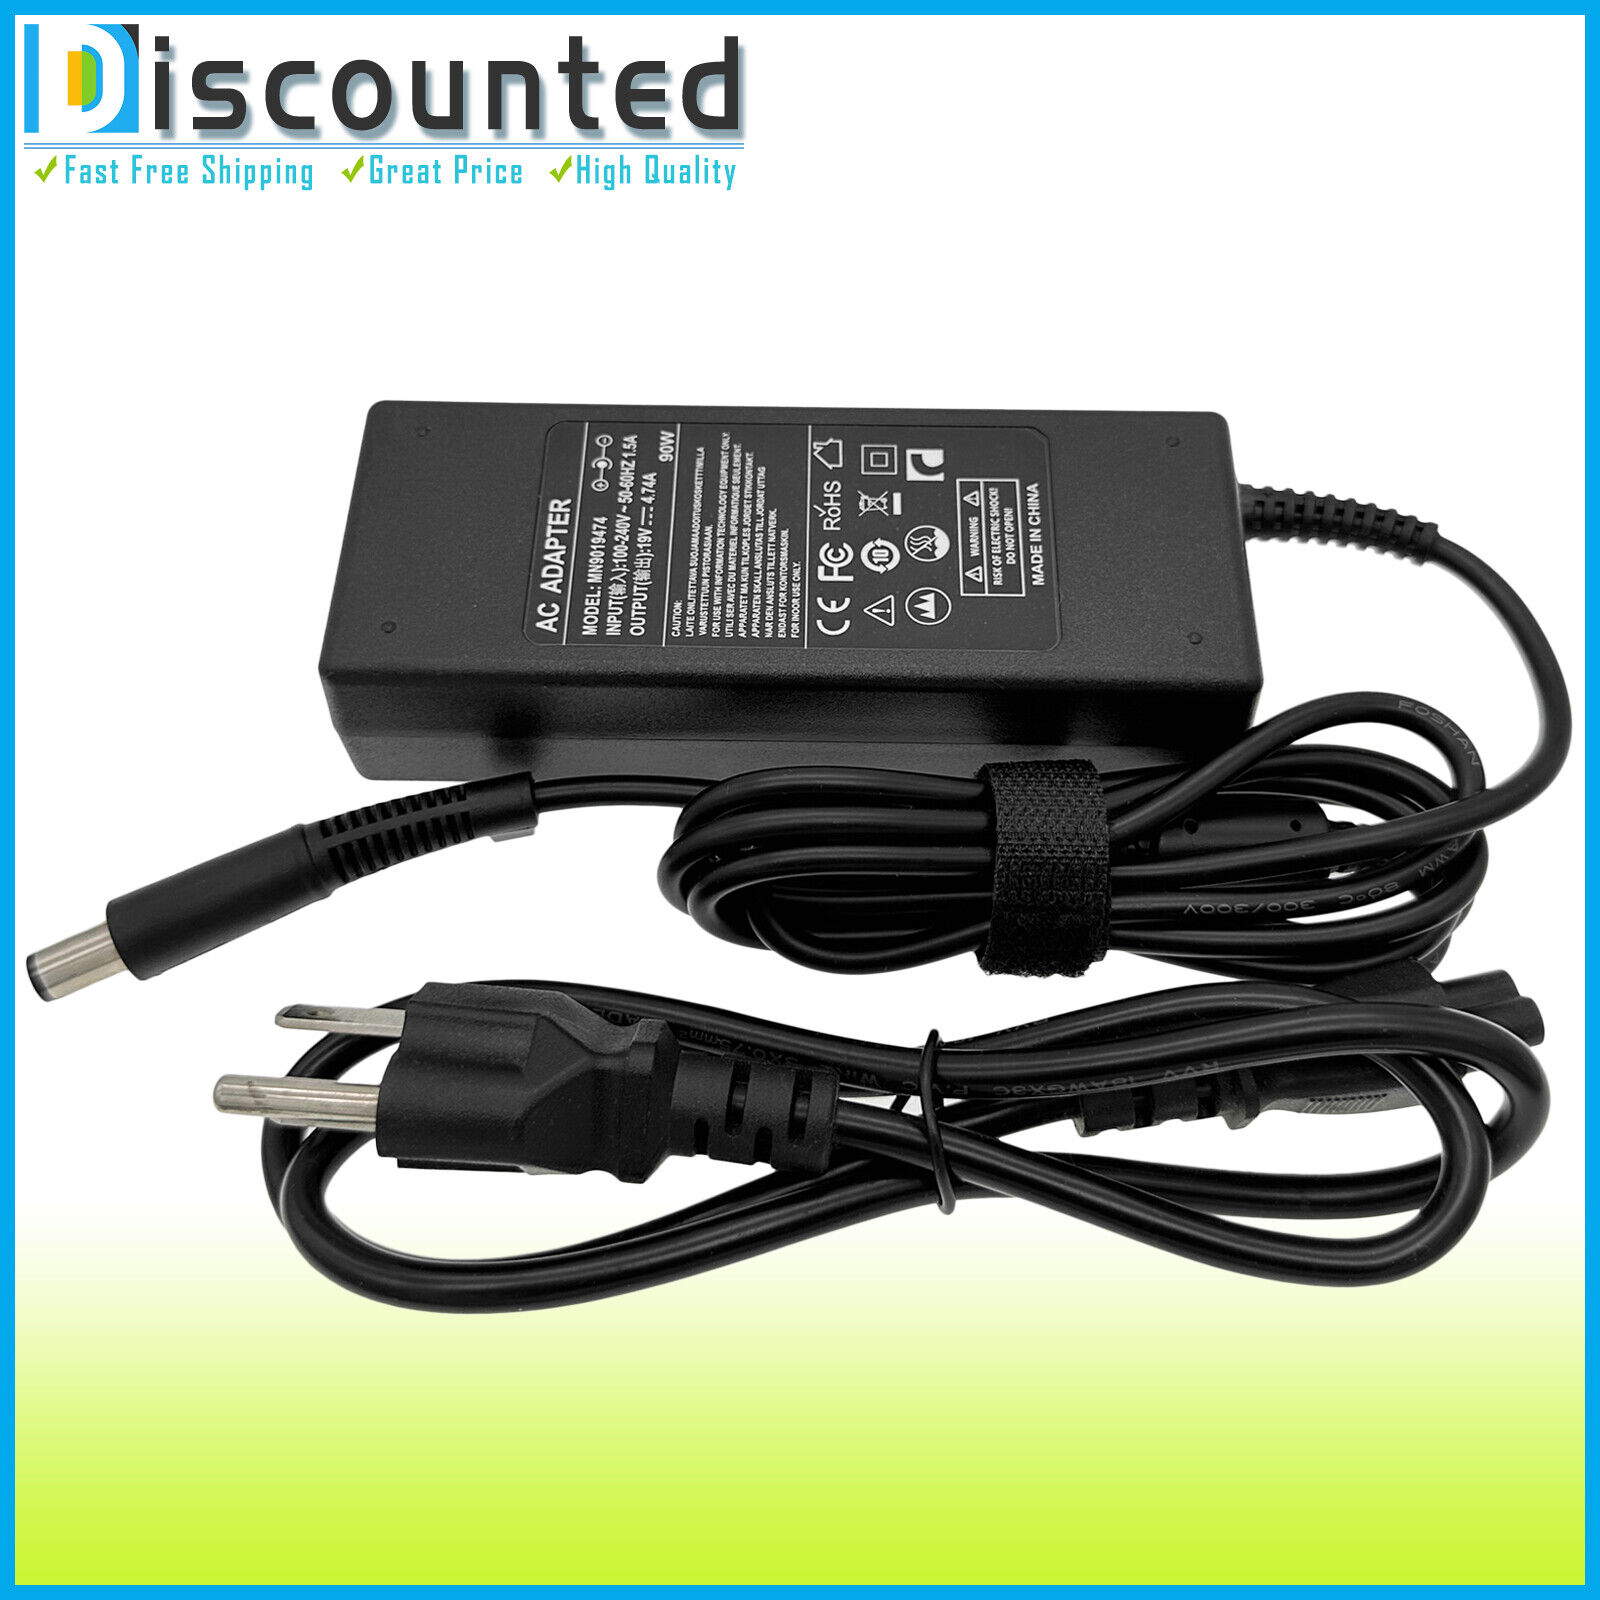 AC Power Adapter Charger FOR HP Pavilion M6 M6T M6-1045DX M6-1035DX Laptop PC